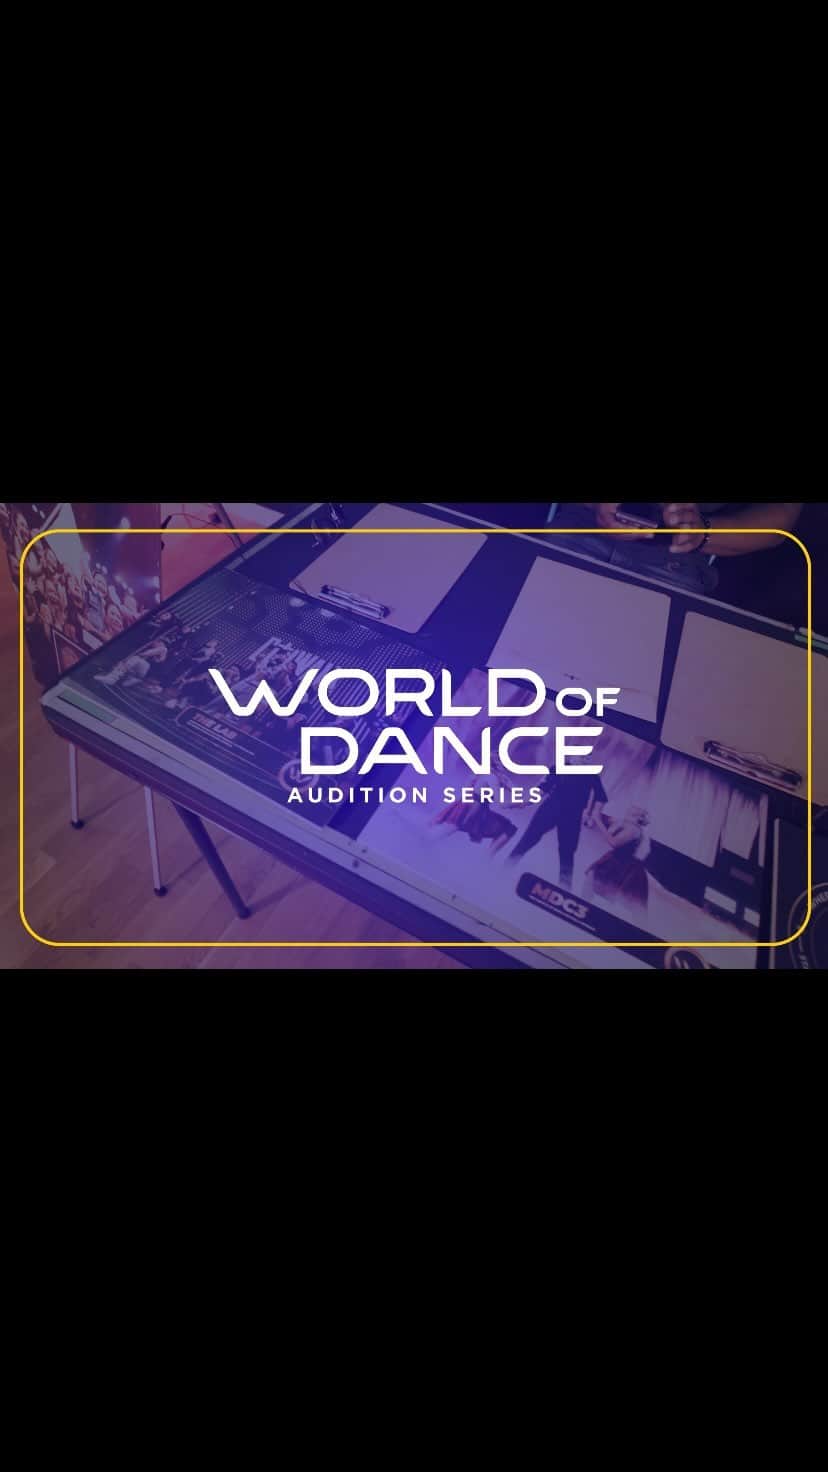 World of Danceのインスタグラム：「Join the World of Dance Audition Series -  A direct gateway to the spectacular World of Dance Summit! 🚀💃 Discover diverse divisions, electrifying auditions, and the path to becoming a World Champion. 🚀✨ Ready to own the stage and score your “Golden Ticket 🎫💫?   Explore Audition Series Events Across the United States  𝟏. 𝐂𝐞𝐫𝐝𝐚𝐟𝐢𝐞𝐝 𝐃𝐚𝐧𝐜𝐞 𝐒𝐭𝐮𝐝𝐢𝐨𝐬 - Alexandria, VA - January 20, 2024 - Address: 6120-A Franconia Road - Contact Person: Rahna Faddoul, Jason Cerda - Studio Website: https://cerdafiedstudios.com/ - Email: cerdafiedstudiosva@gmail.com  𝟐. 𝐌𝐢𝐥𝐥𝐞𝐧𝐧𝐢𝐮𝐦 𝐃𝐚𝐧𝐜𝐞 𝐂𝐨𝐦𝐩𝐥𝐞𝐱 𝐒𝐋𝐂  - Salt Lake City, UT - January 27, 2024 - Address: 602 E 600 ST - Contact Person: Koni Wray - Email: koni.wray@gmail.com  𝟑. 𝐂𝐂 & 𝐂𝐎 𝐃𝐚𝐧𝐜𝐞 𝐂𝐨𝐦𝐩𝐥𝐞𝐱  - Raleigh, NC - February 11, 2024 - Address: 8863 Six Forks Rd. - Contact Person: Christy Curtis, Janine - Email: christy@cccodance.com, info@cccodance.com  𝟒. 𝐅𝐨𝐫𝐜𝐞 𝐃𝐚𝐧𝐜𝐞 𝐀𝐜𝐚𝐝𝐞𝐦𝐲  - Richmond, KY - February 24, 2024 - Address: 312 Spangler Dr - Contact Person: Kaylee Monroe - Email: dancewithforce@gmail.com  Check out more, Link In Bio ✨  #WODAuditions #WODsummit #WorldOfDance #WOD #dance #dancer #dancesummit #choreography #worldchampionship #streetdancer #dancelife #dancevideo」